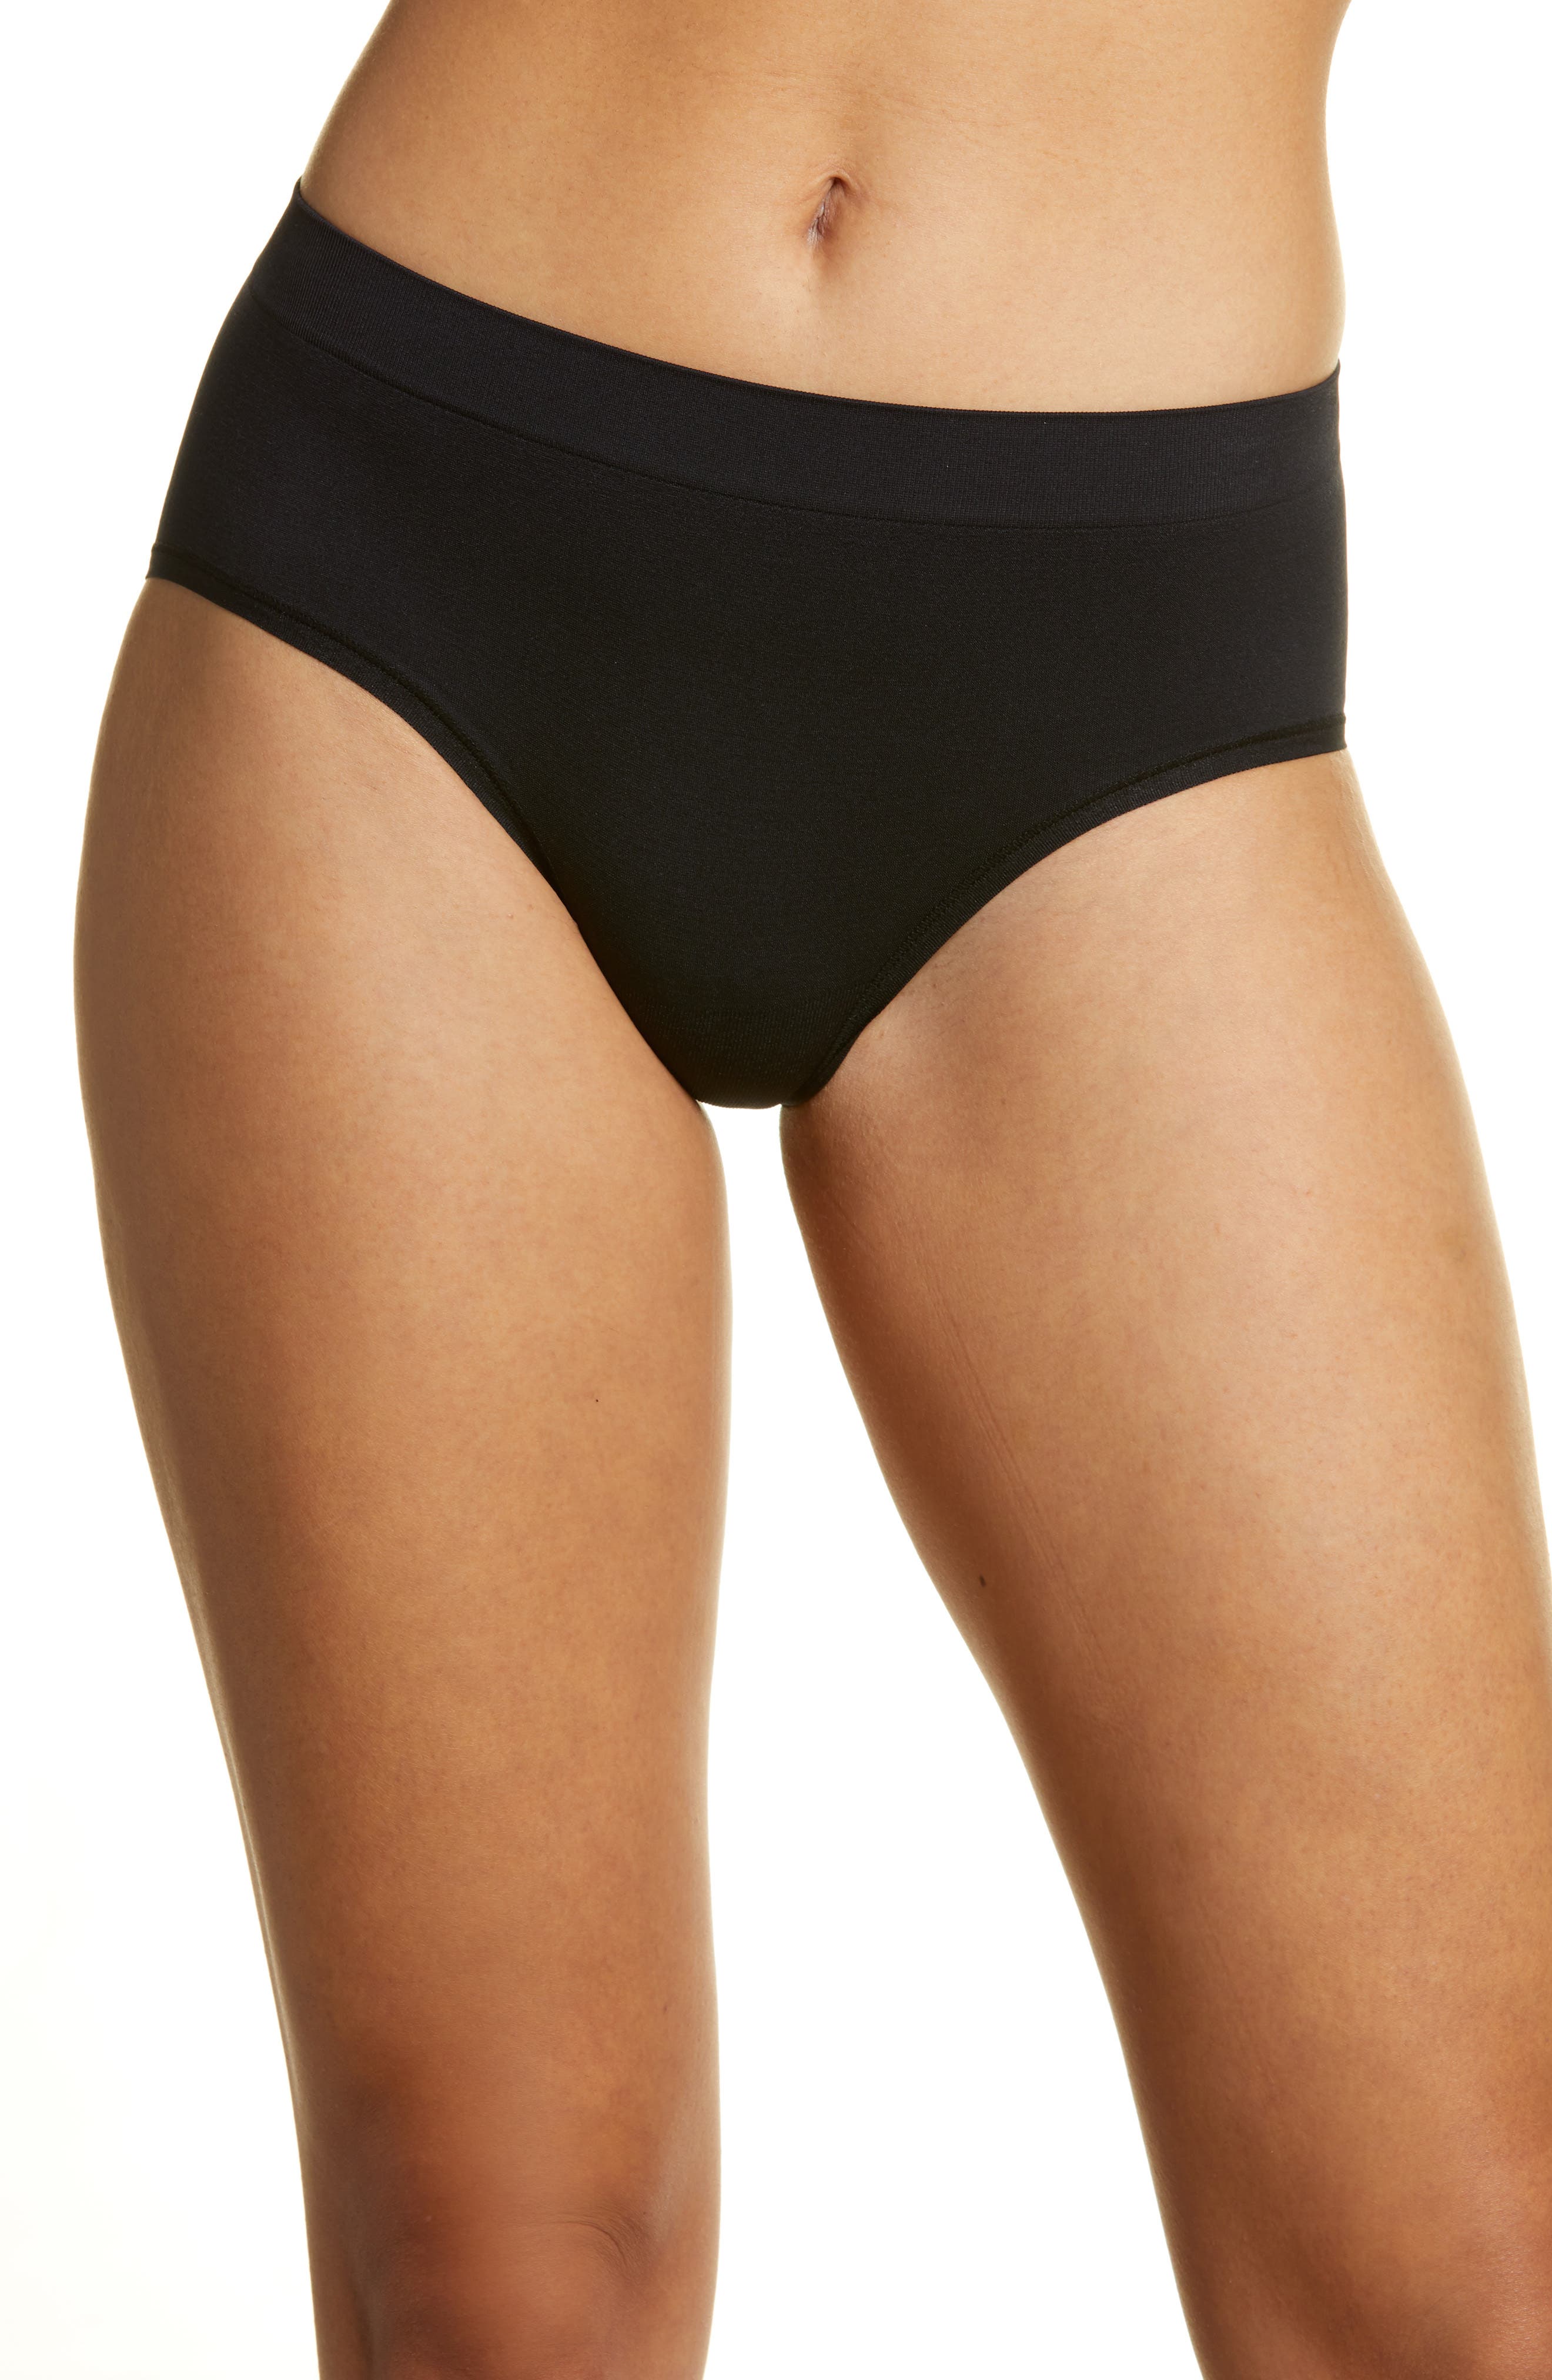 B.bare Hipster Panties in Night at Nordstrom Nordstrom Women Clothing Underwear Briefs Hipsters 